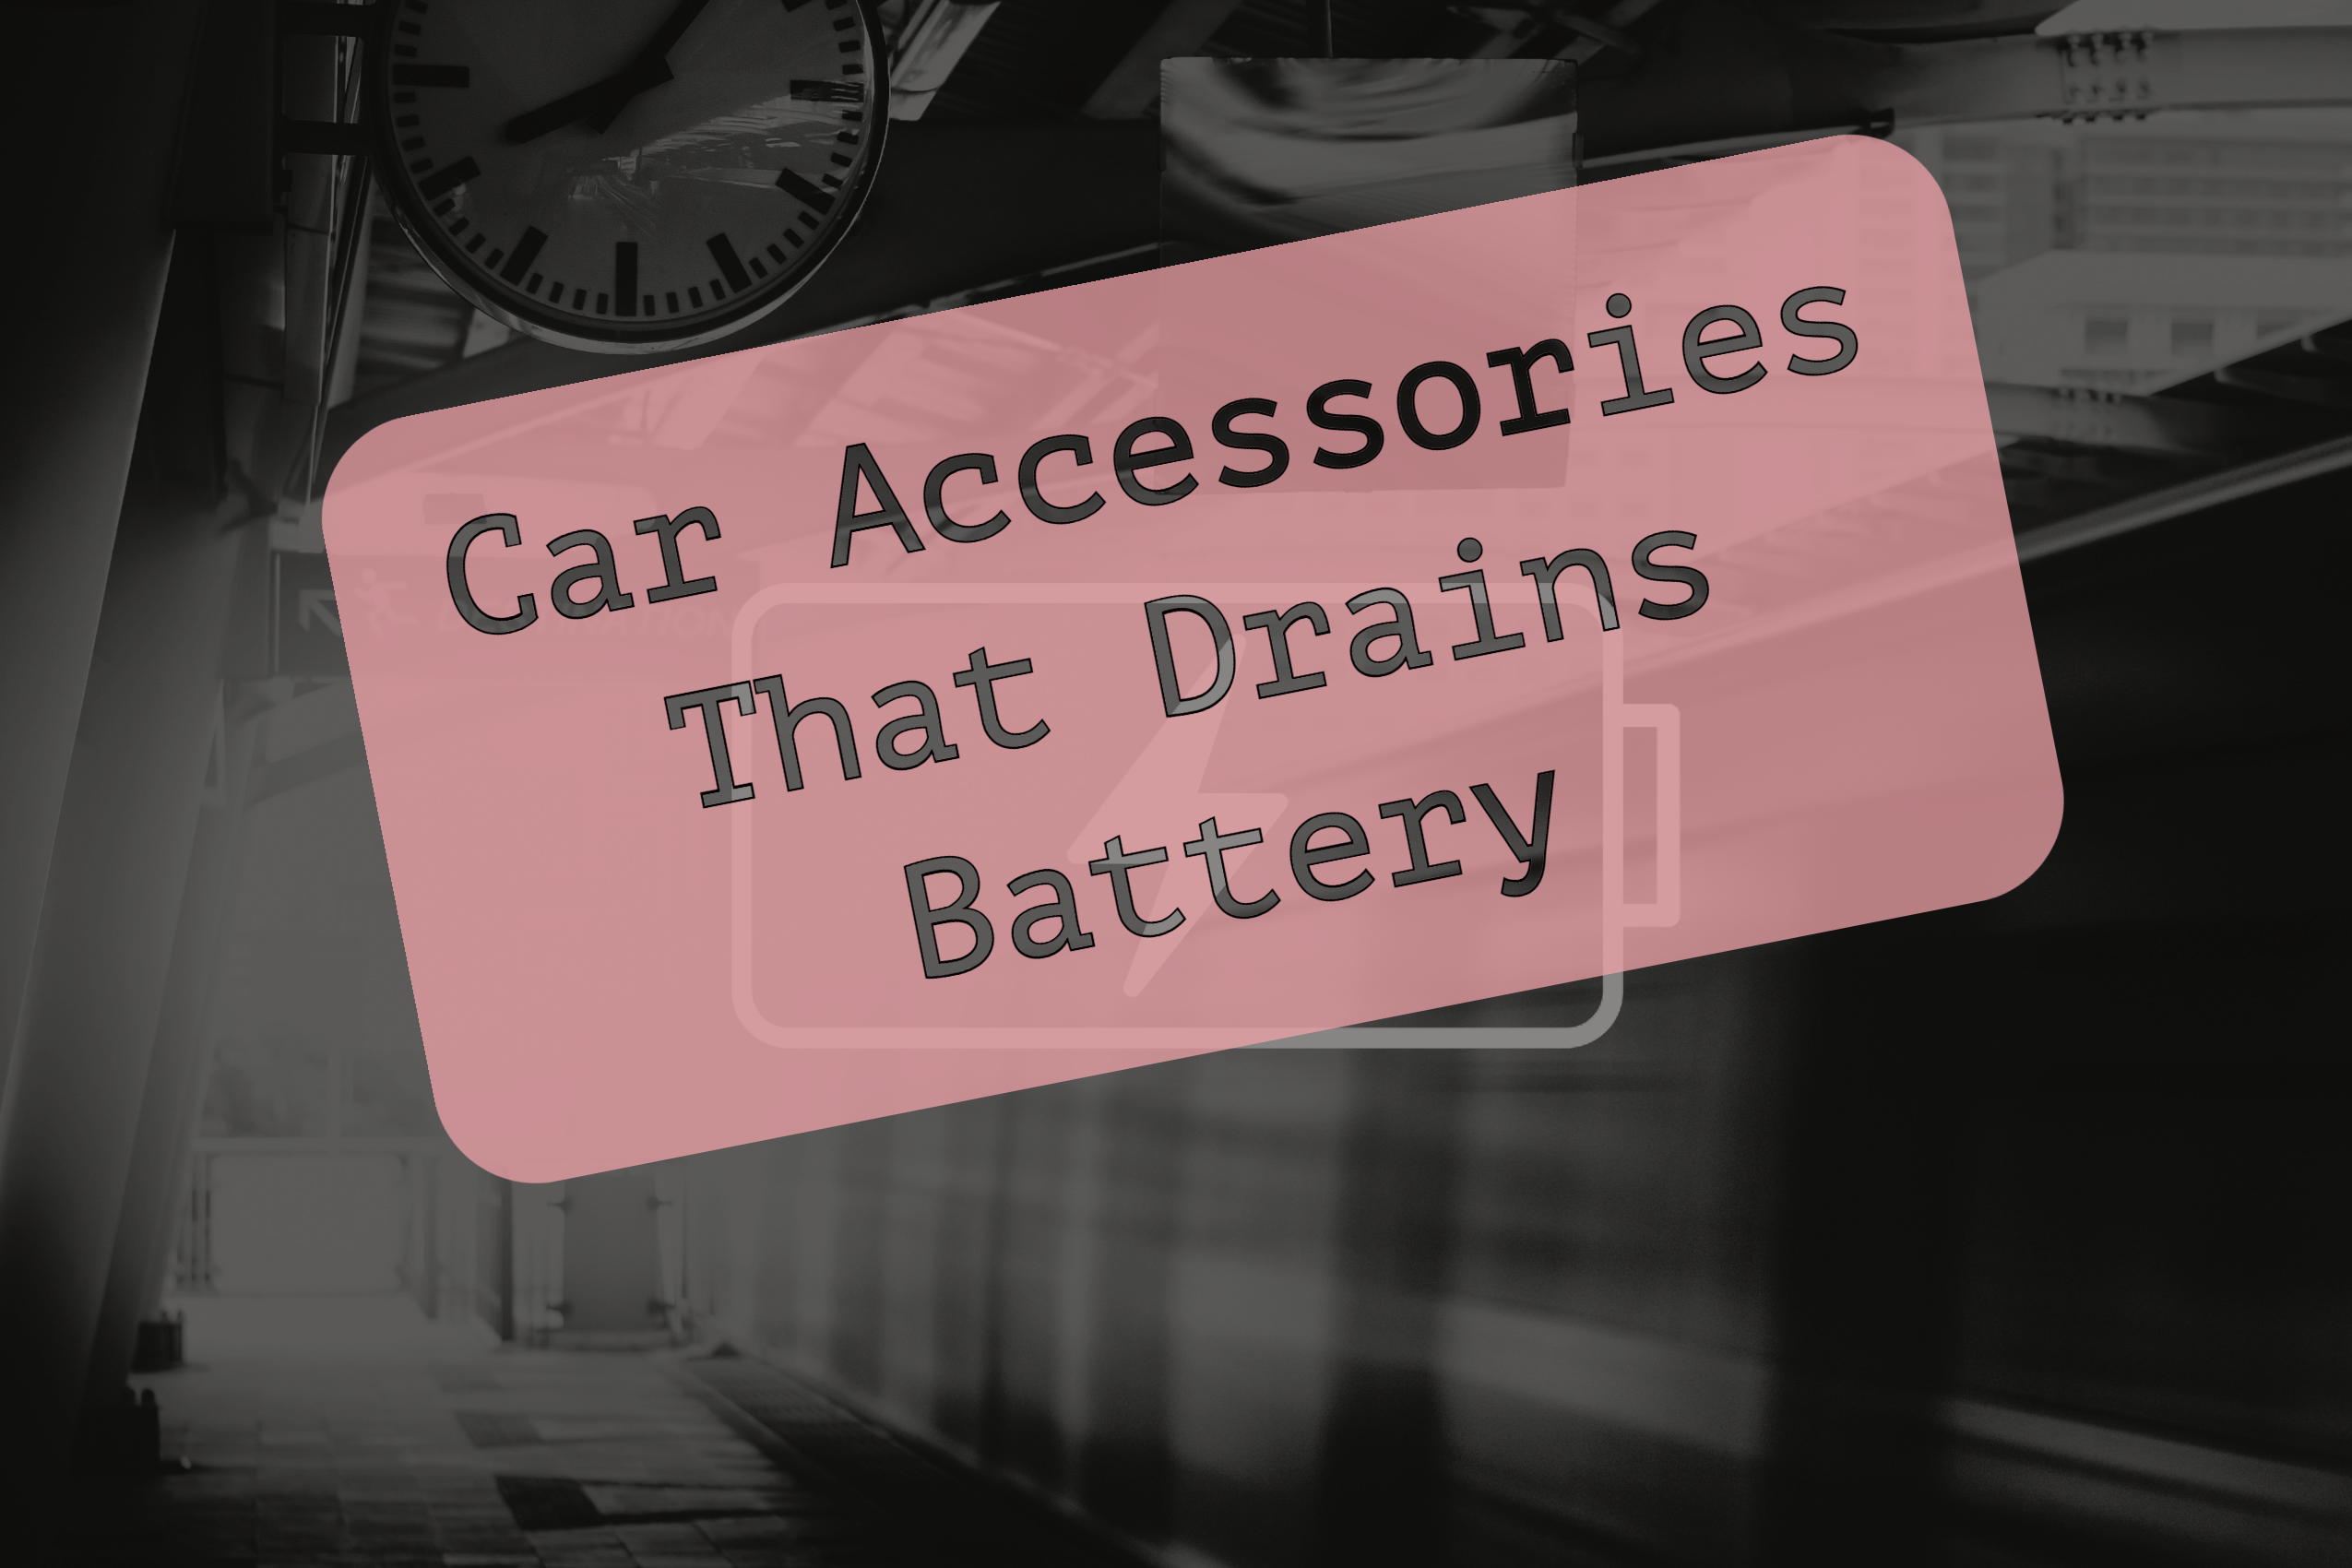 The Top Car Accessories That Drain Your Car Battery